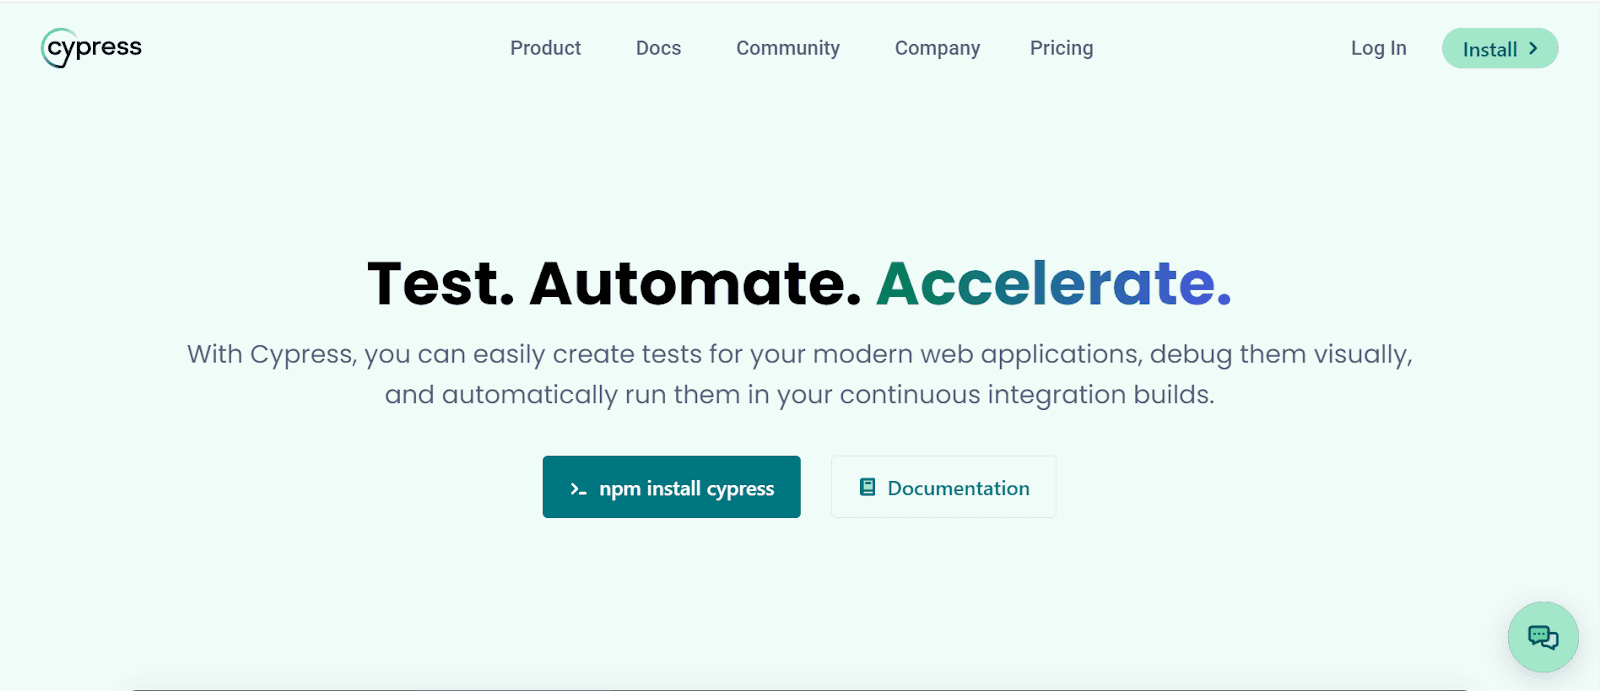 Cypress is one of the modern and popular test automation tools